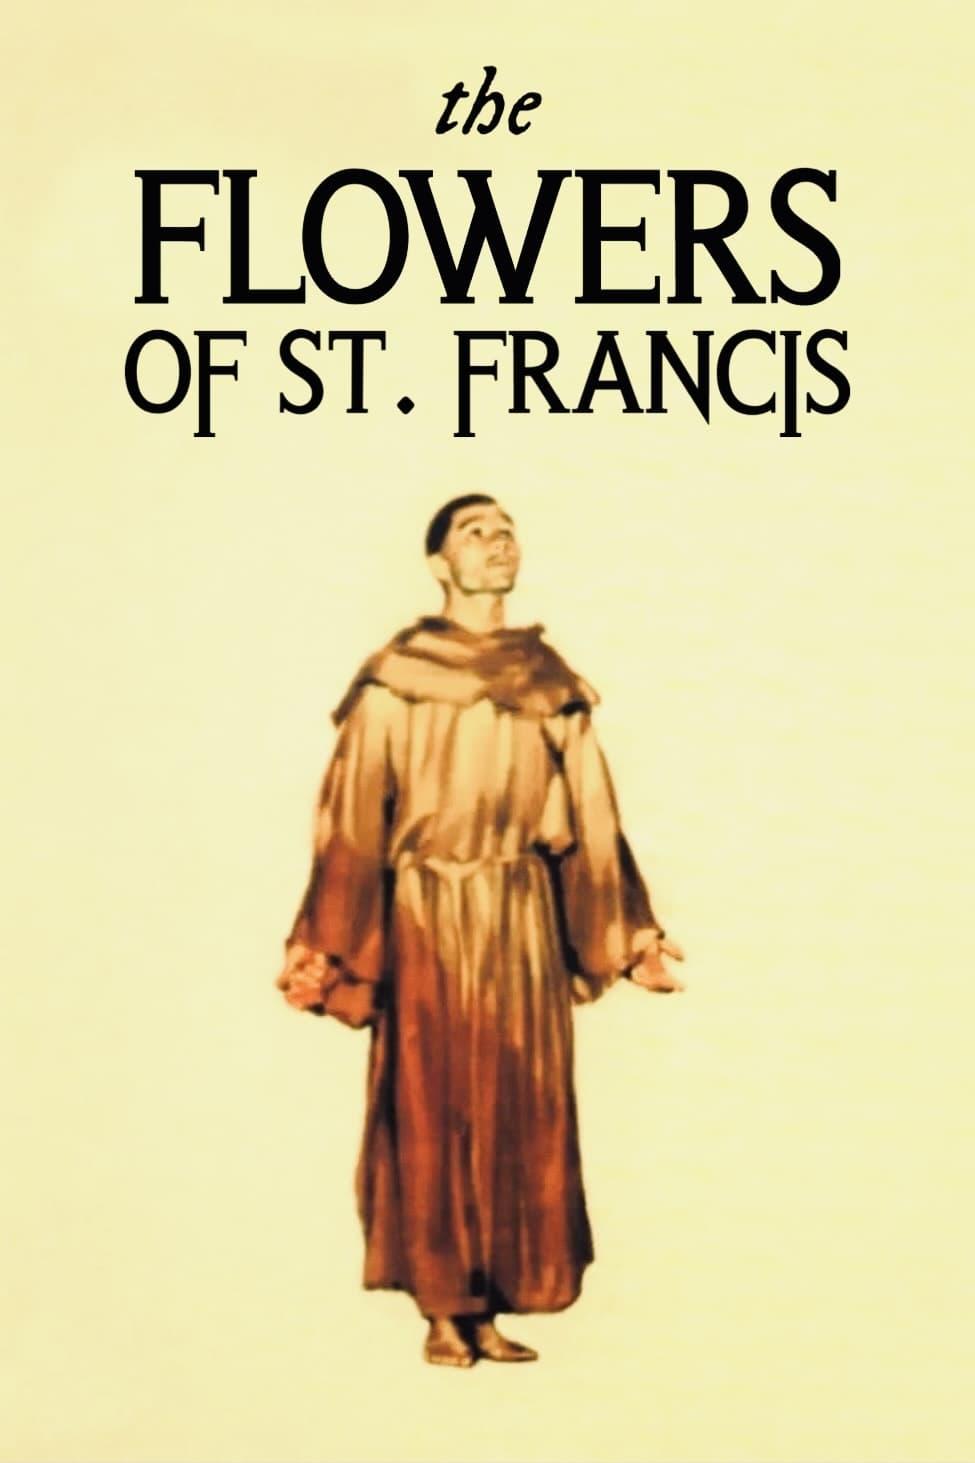 The Flowers of St. Francis poster